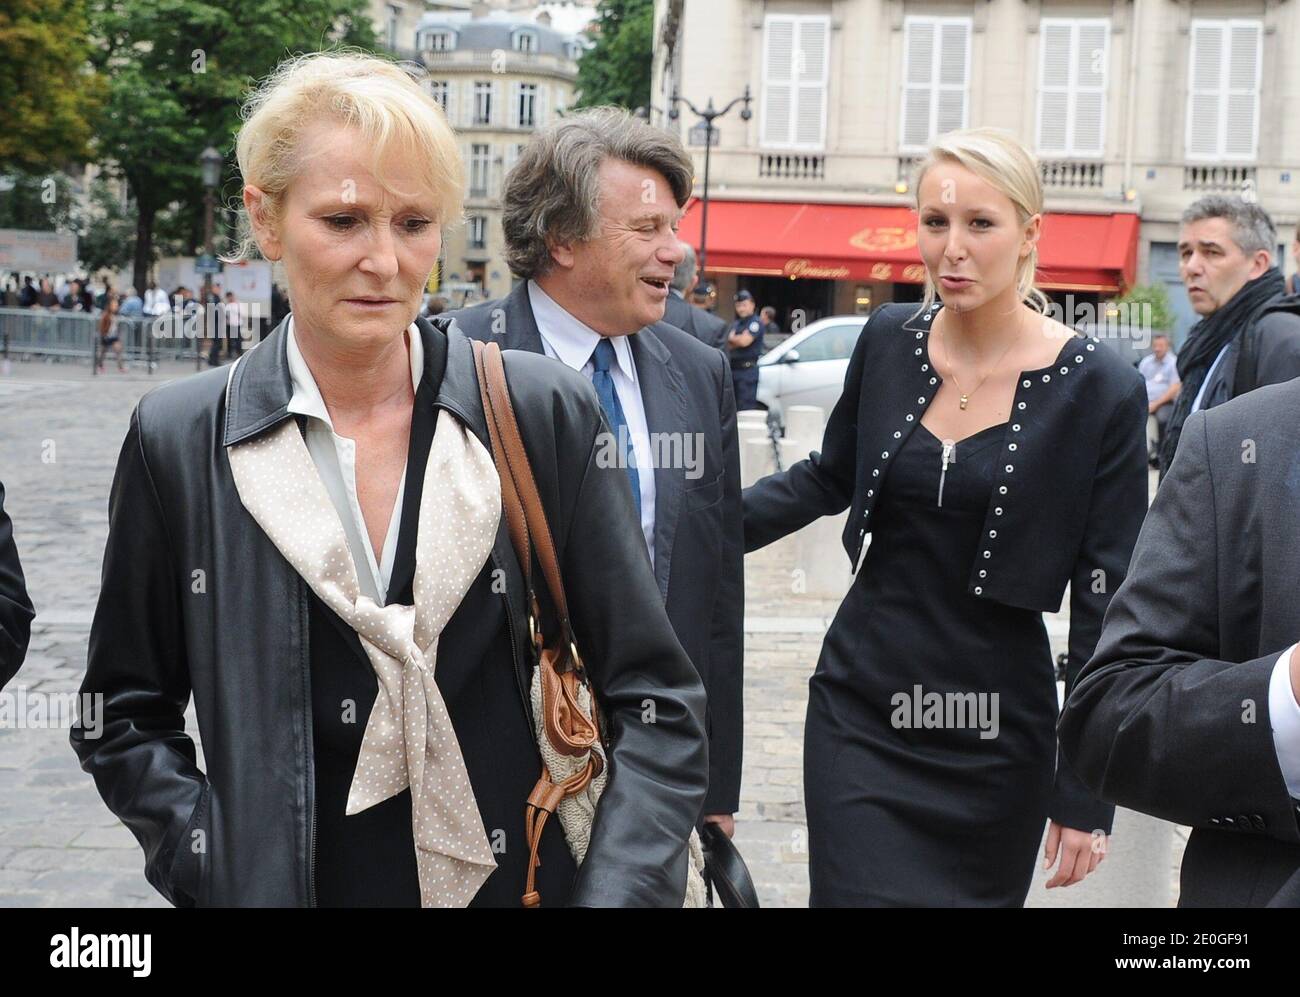 French far-right Front national (FN) newly-elected MP Marion Marechal-Le Pen  and FN newly-elected MP Gilbert Collard flanked by her mother Yann Le Pen  and Maxime Ango arrive French national assembly in Paris,